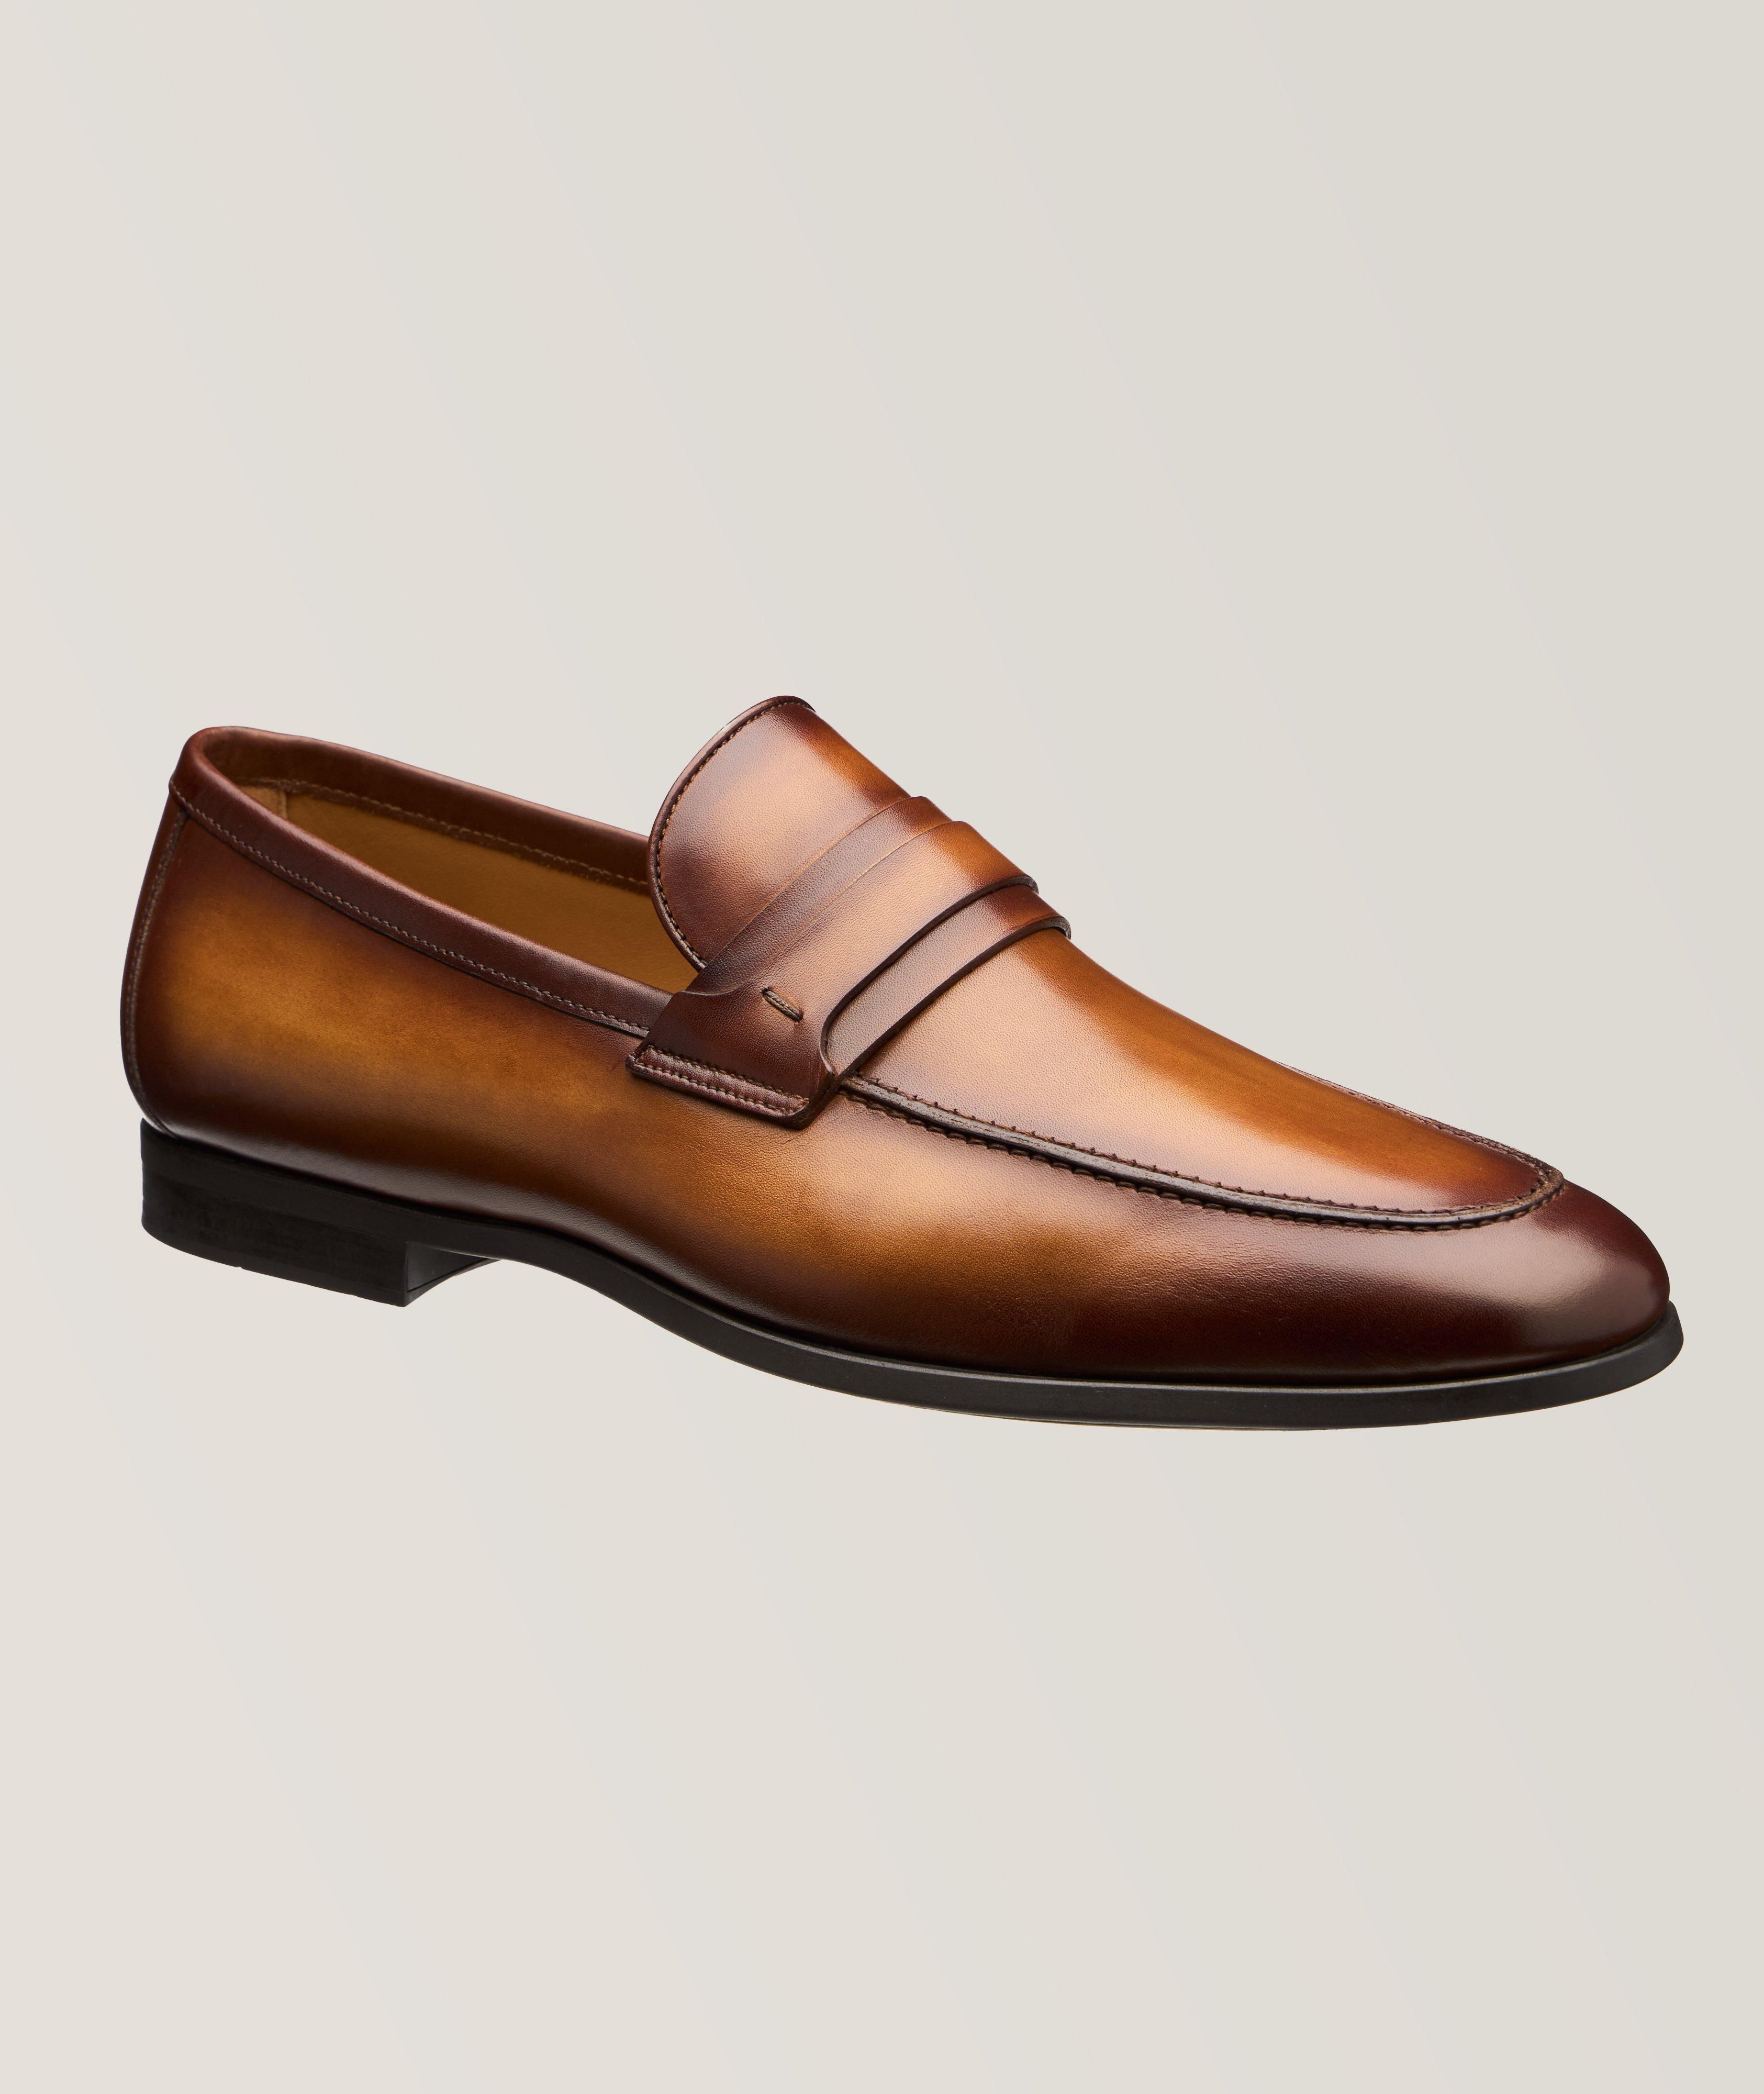 Daniel Leather Loafers image 0